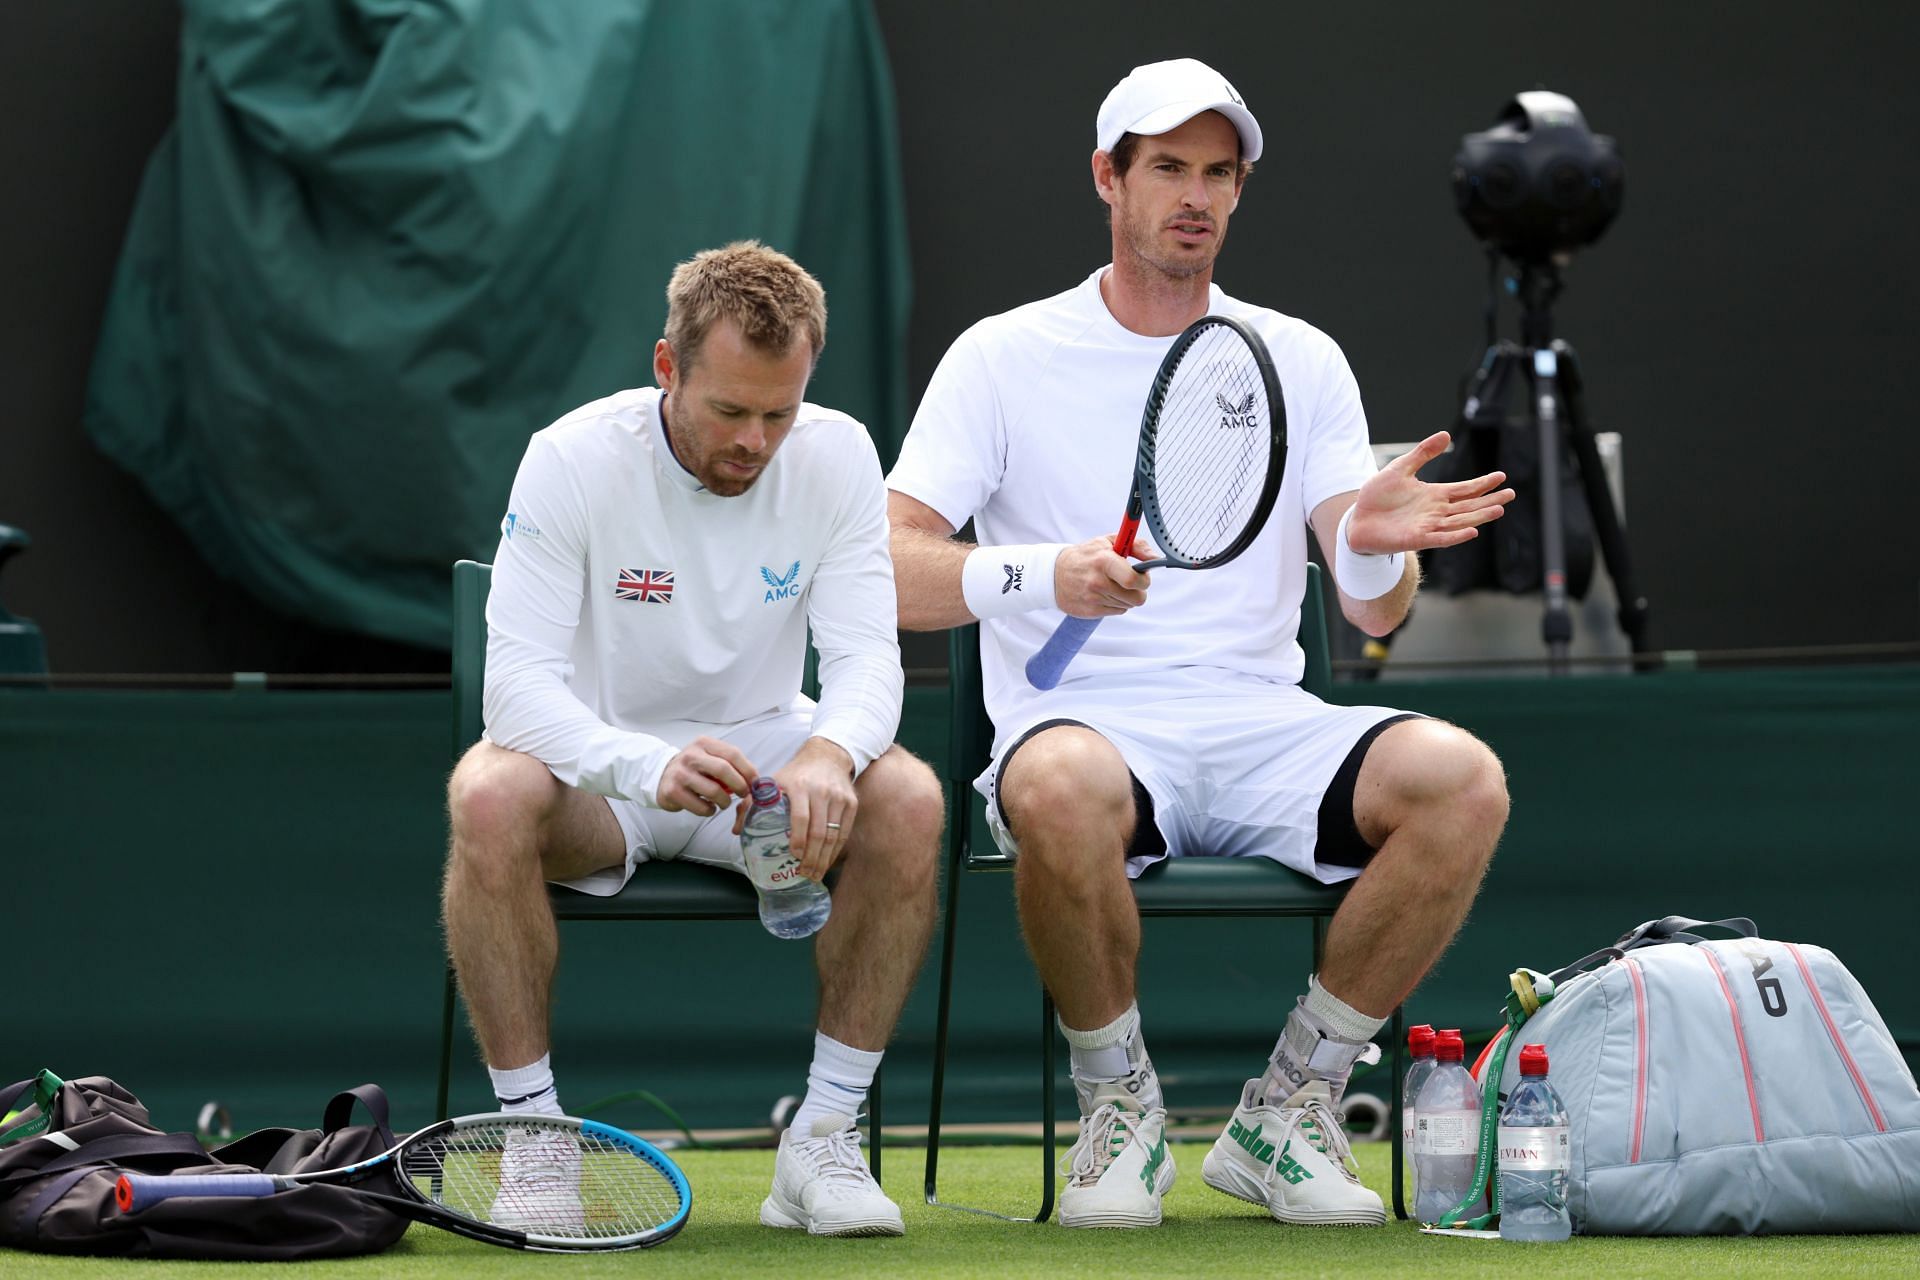 Andy Murray takes on James Duckworth in his 2022 Wimbledon opener.